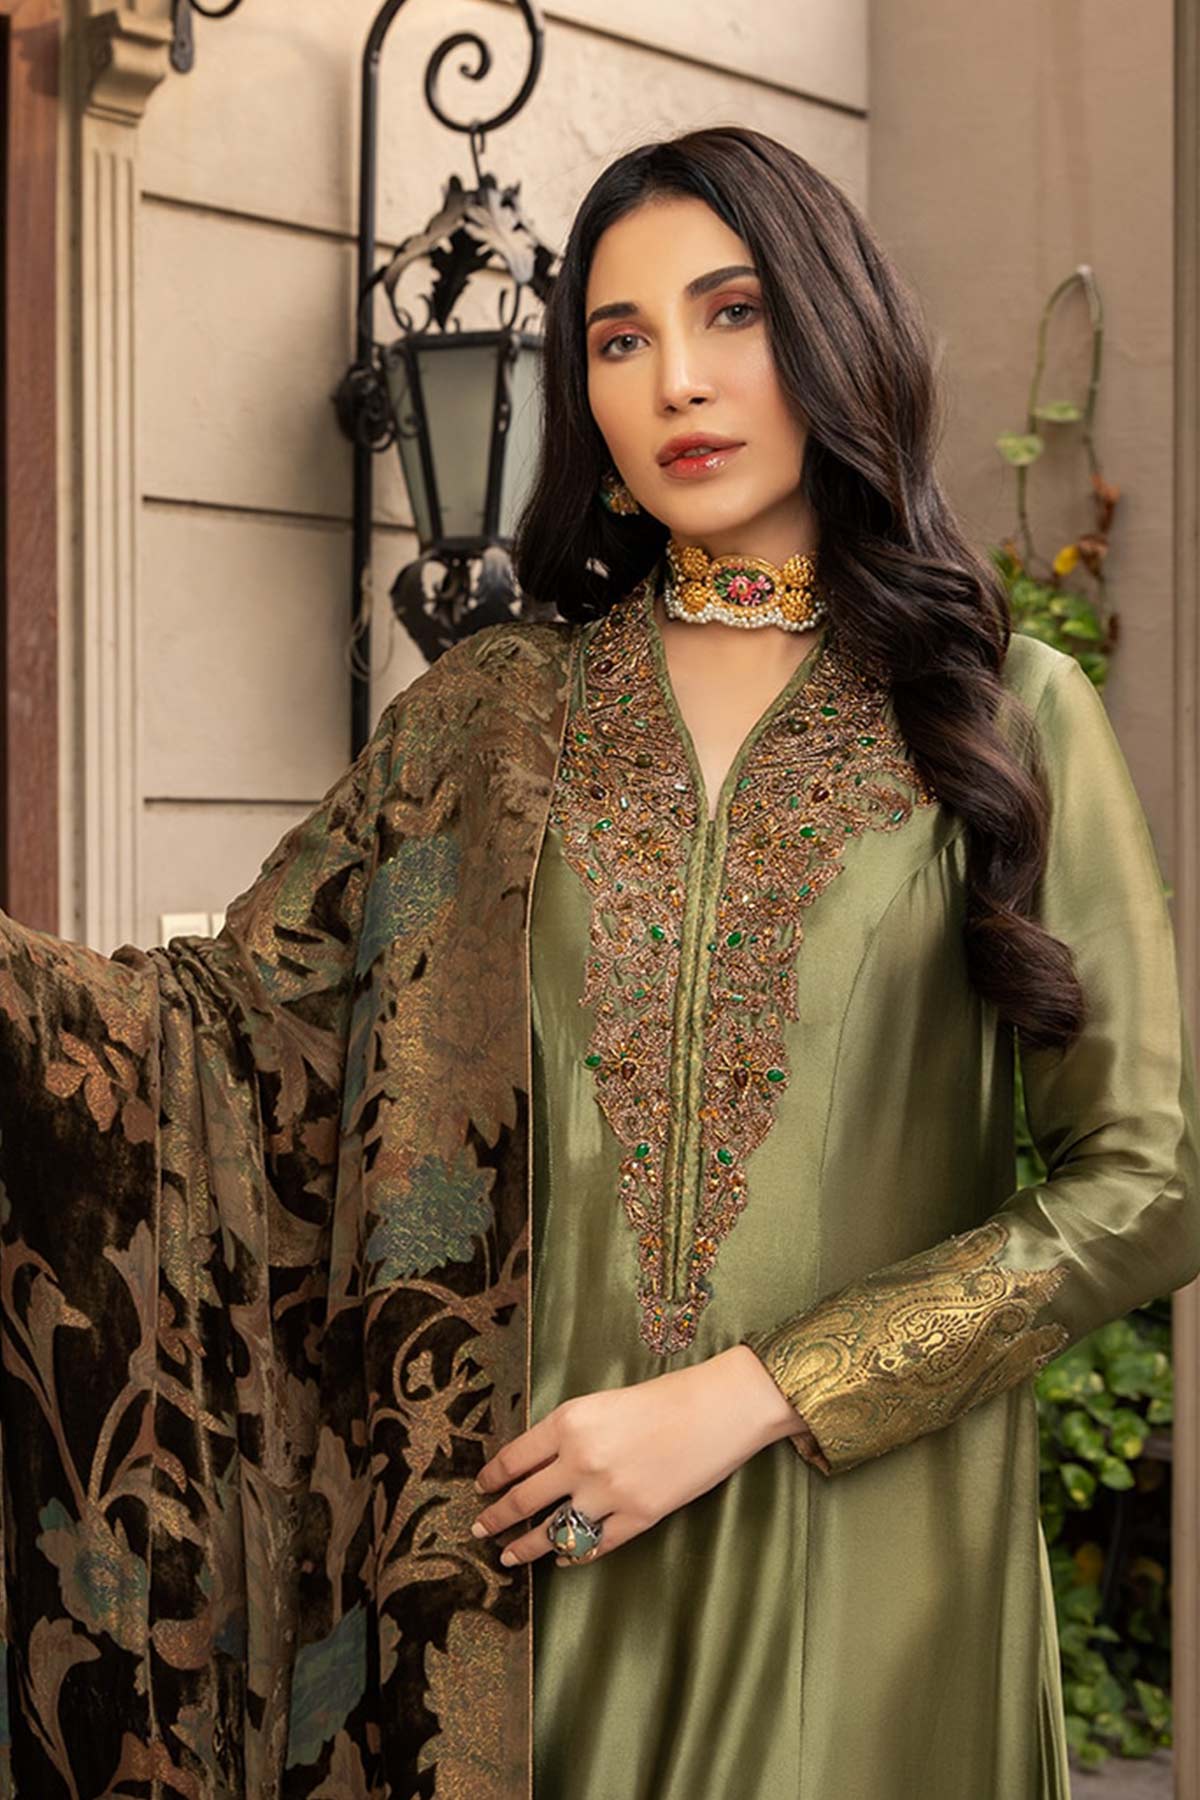 The Queen’s Chandelier Shawl - Nilofer Shahid